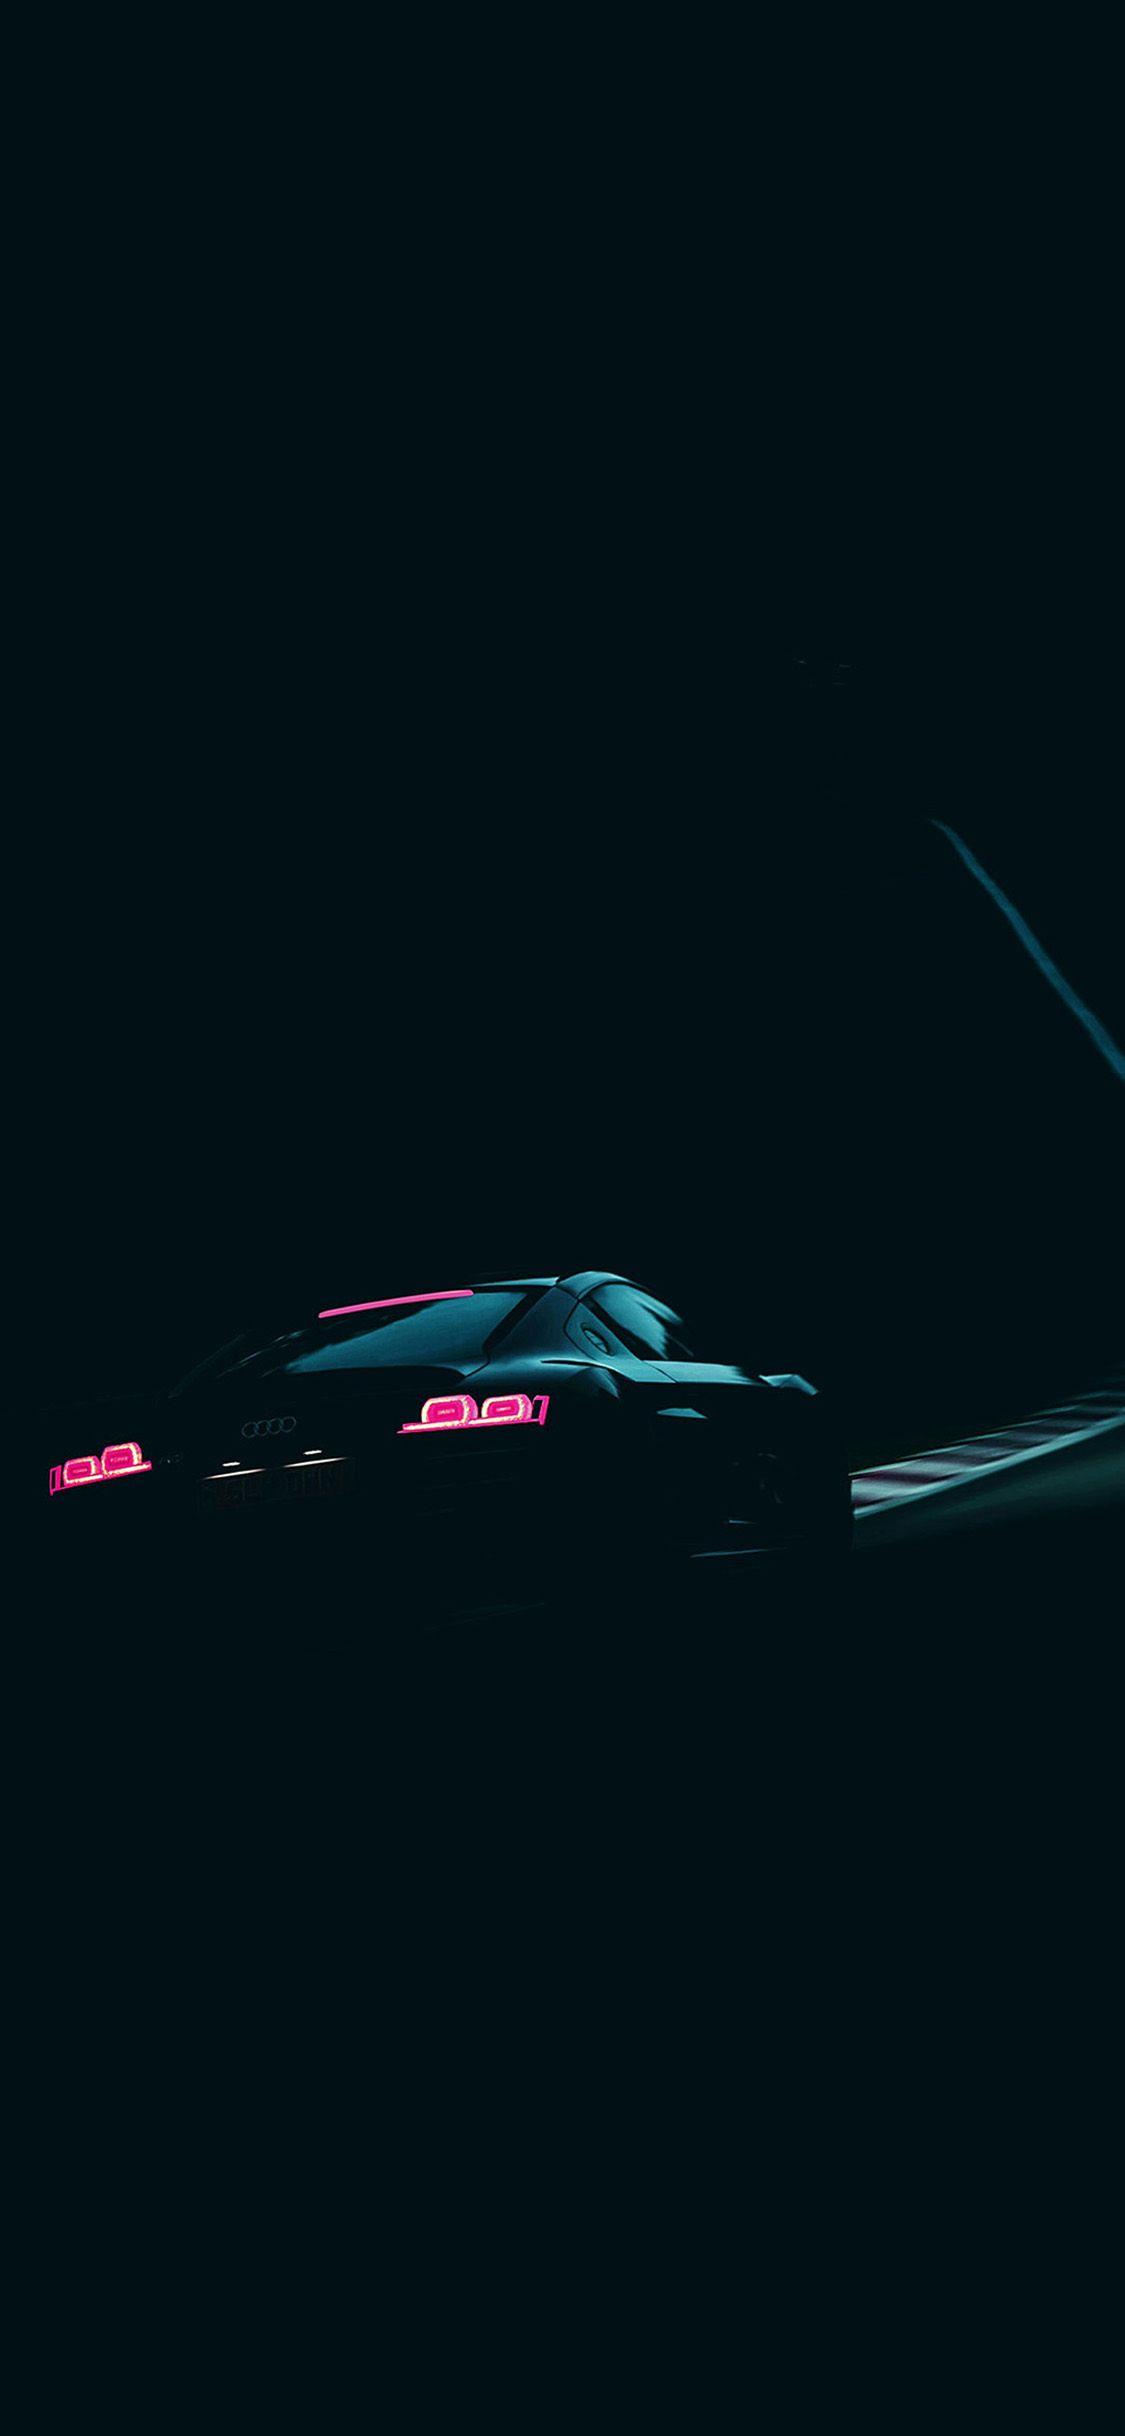 Iphone Xs Max Cars Image Wallpapers